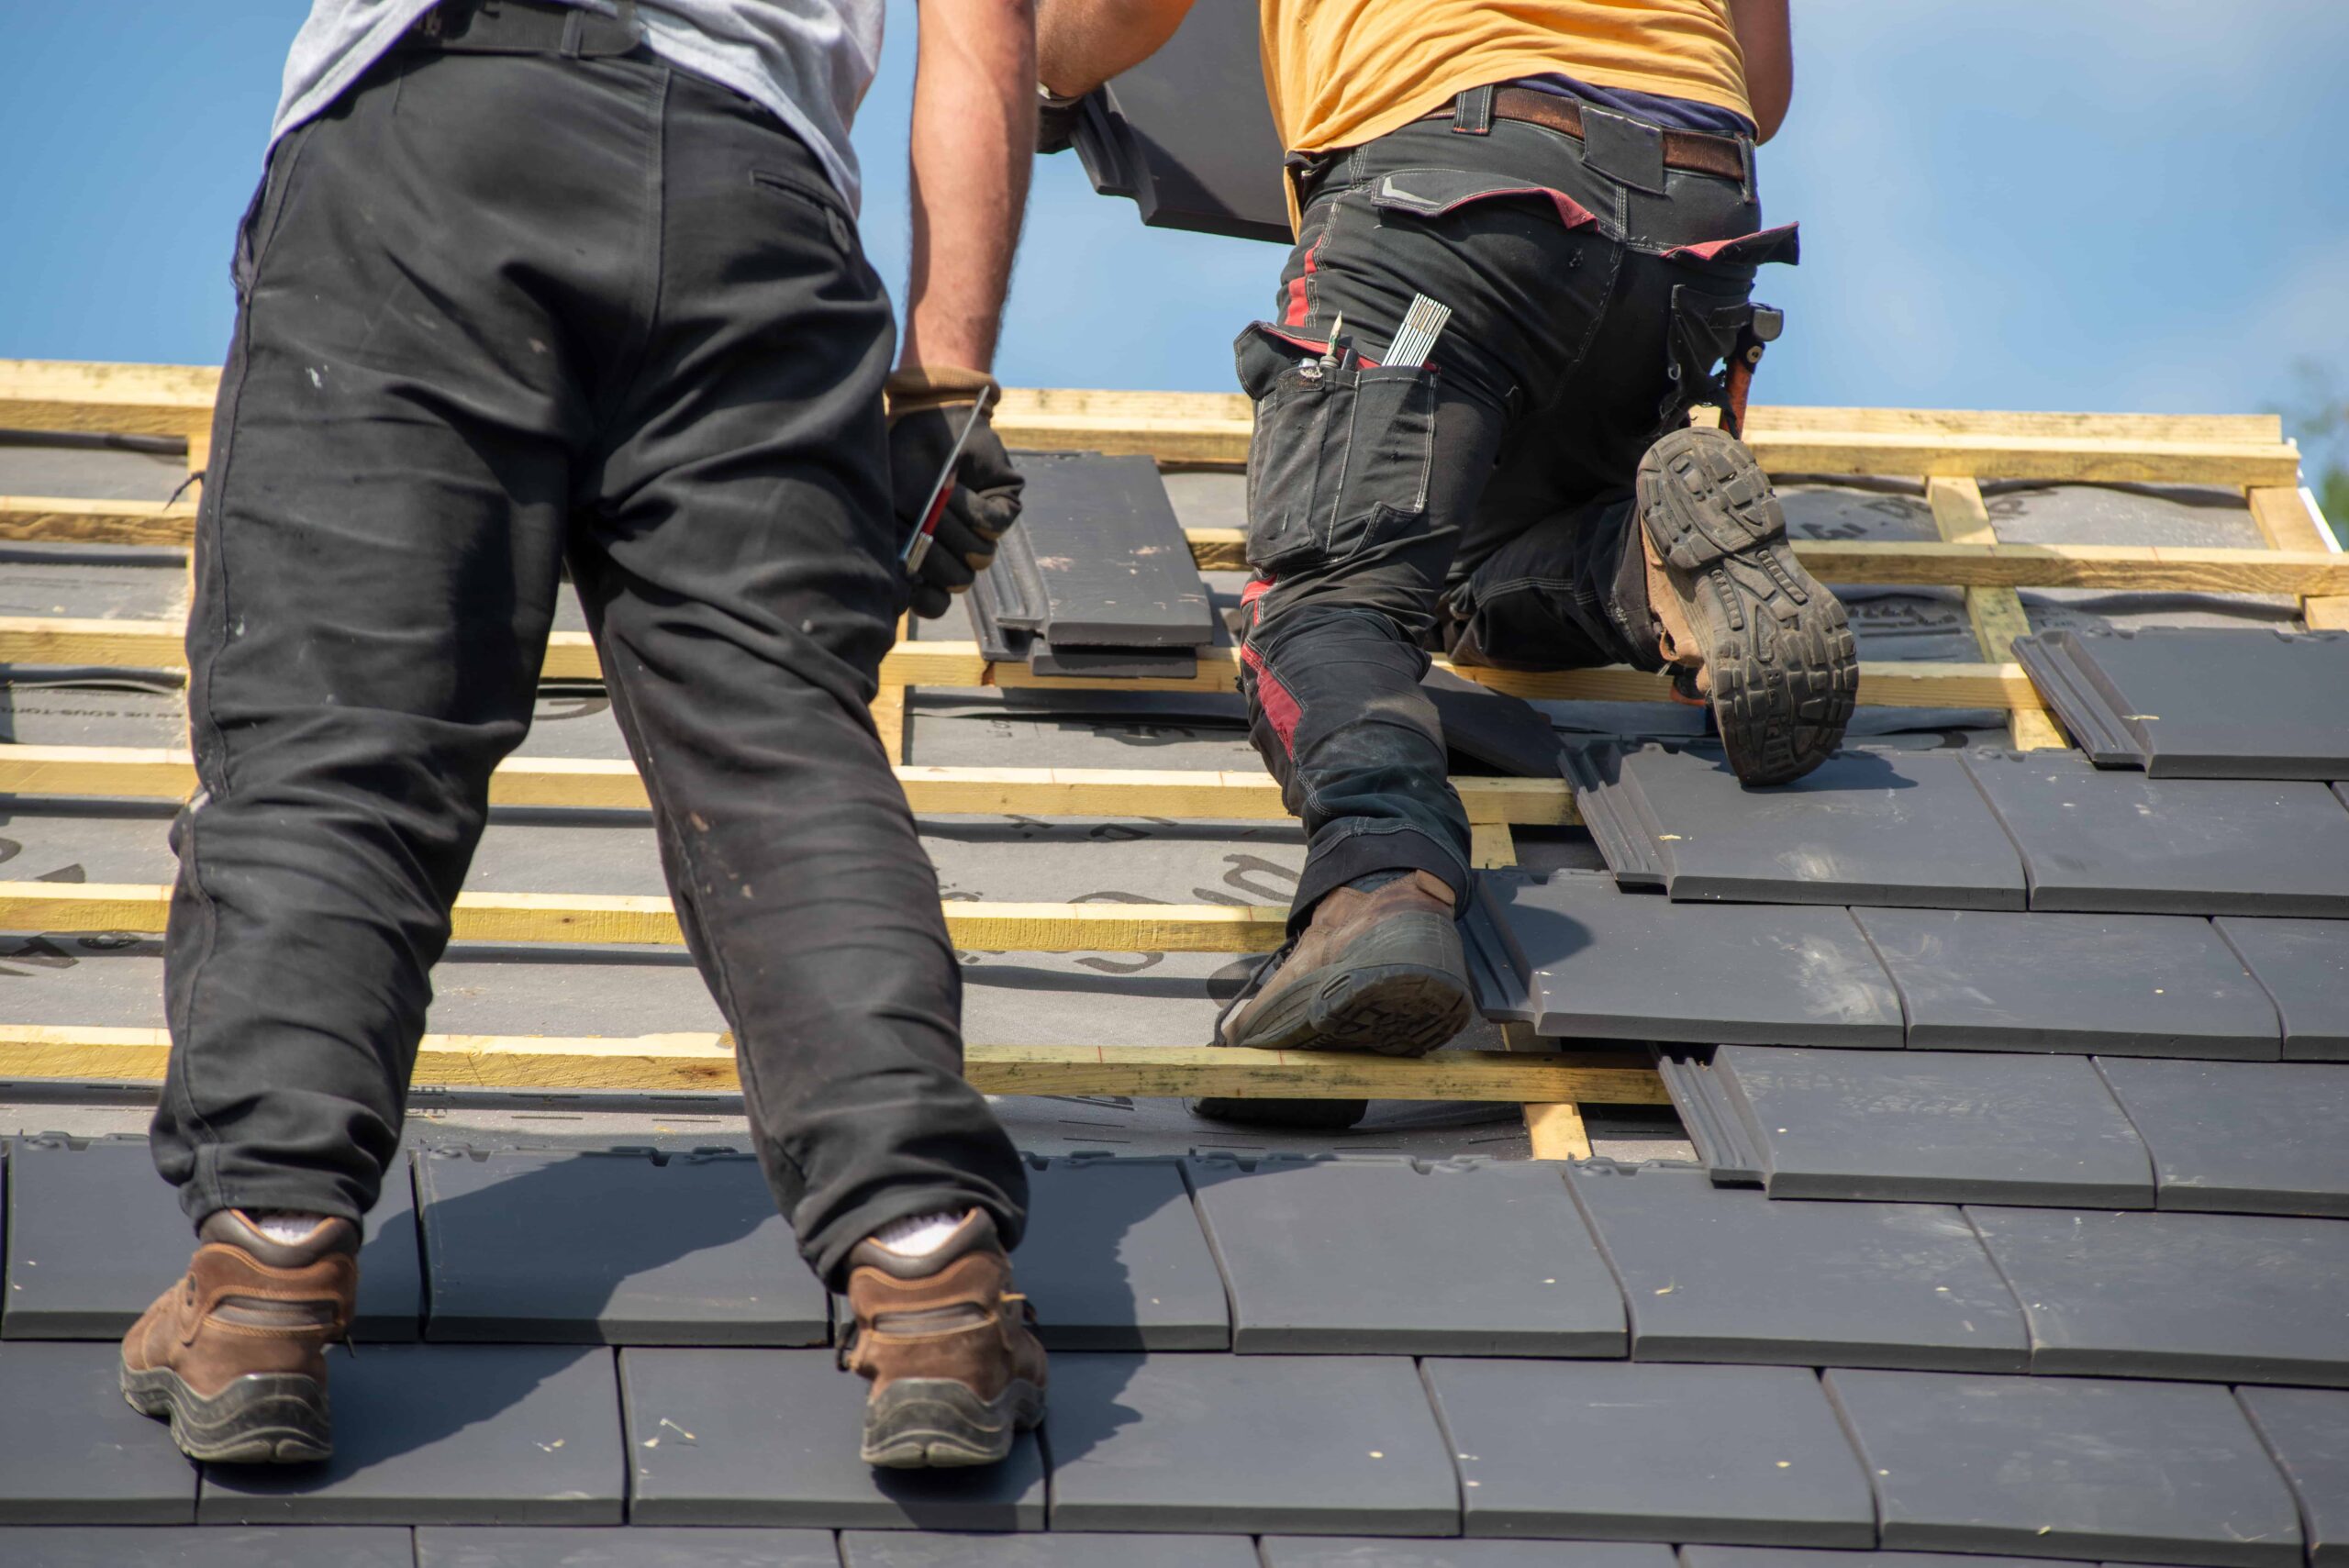 Cambridge Roofing Services